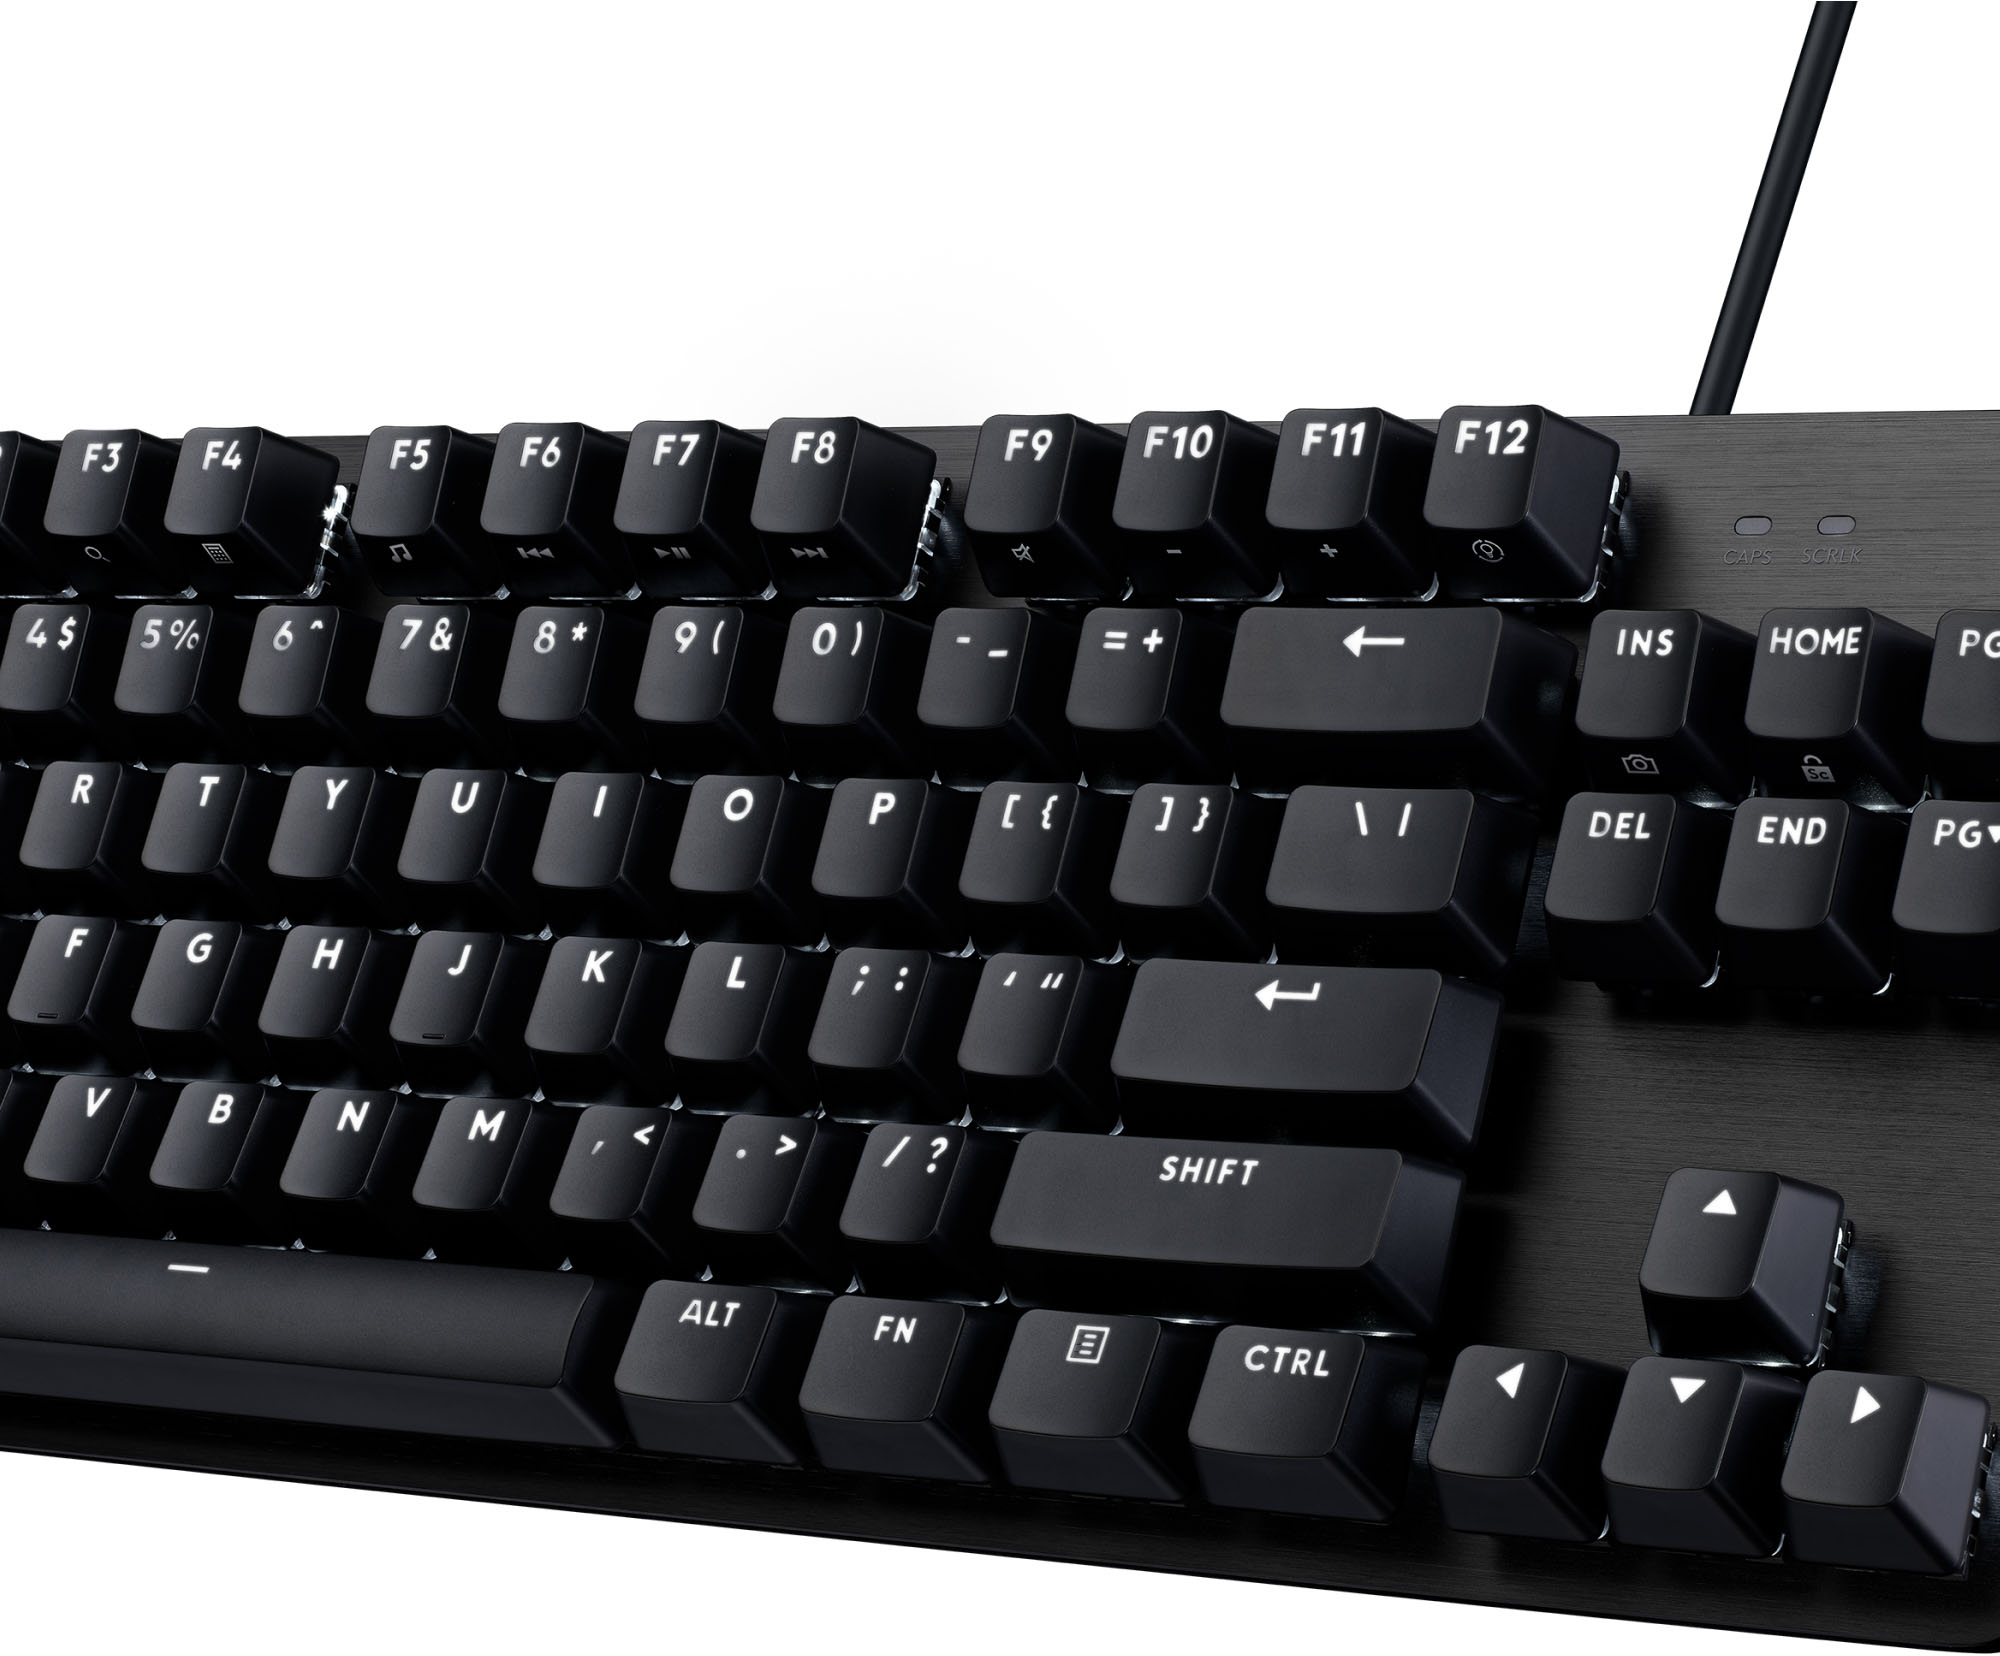 Logitech G413 TKL SE Mechanical Gaming Keyboard - Compact Backlit Keyboard  with Tactile Mechanical Switches, Anti-Ghosting, Compatible with Windows